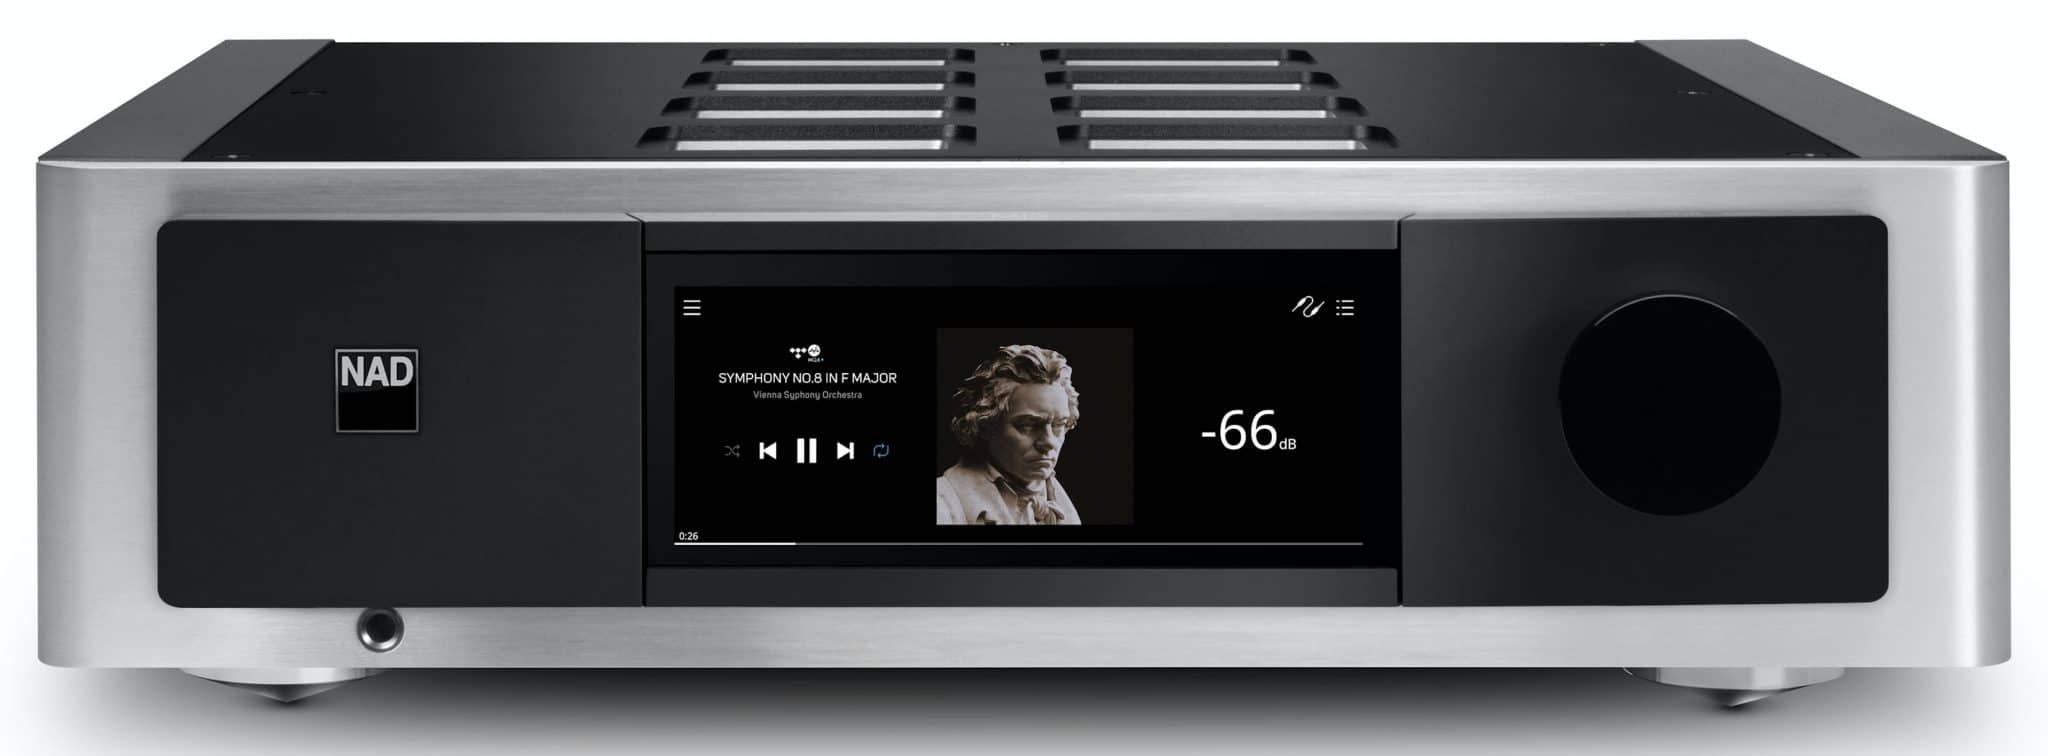 M33 Streaming DAC/Amp From NAD